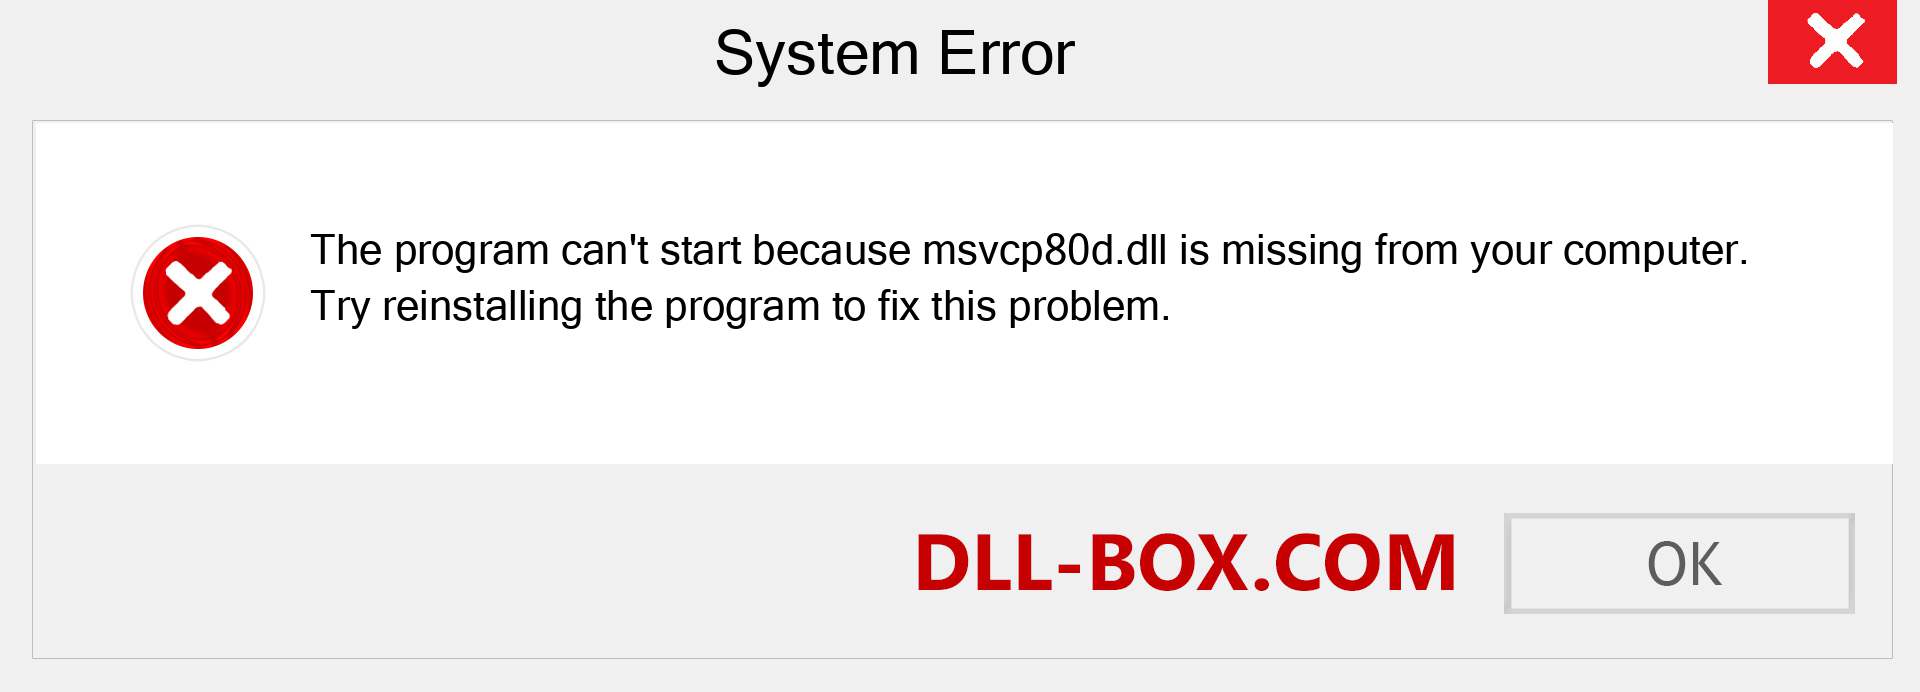  msvcp80d.dll file is missing?. Download for Windows 7, 8, 10 - Fix  msvcp80d dll Missing Error on Windows, photos, images